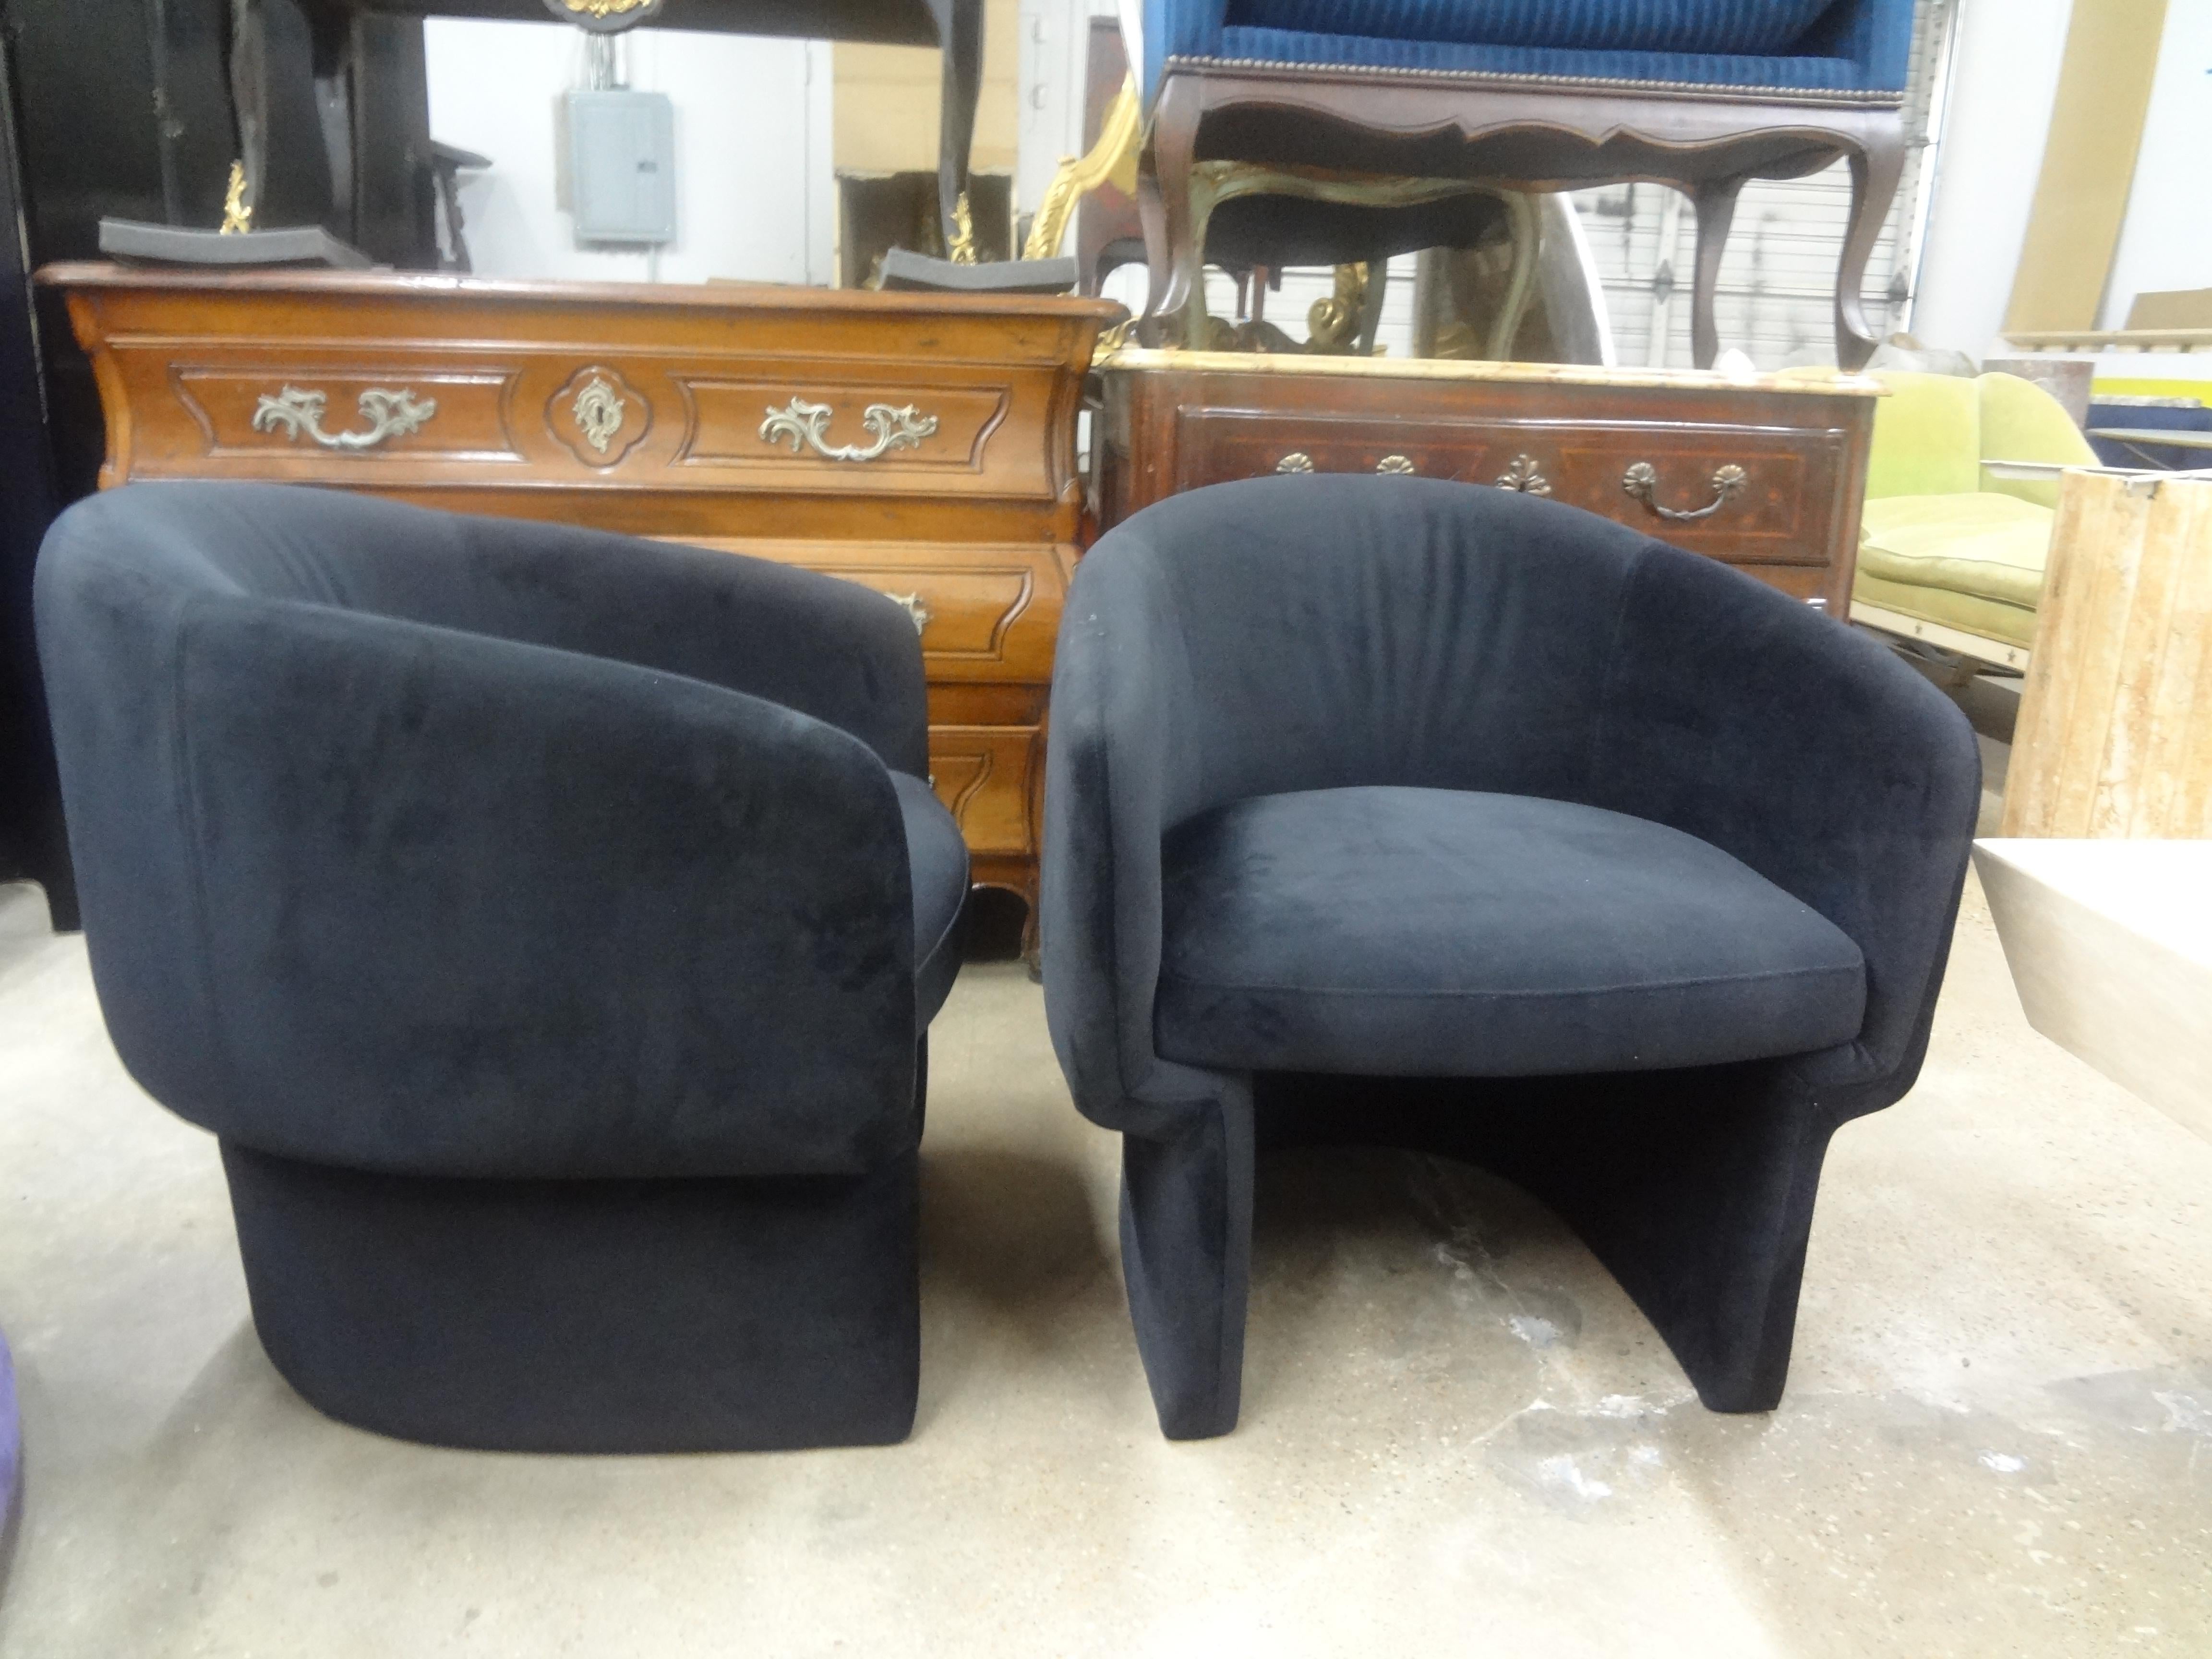 Post-Modern Pair Of Milo Baughman Inspired Postmodern Lounge Chairs On Plinths For Sale